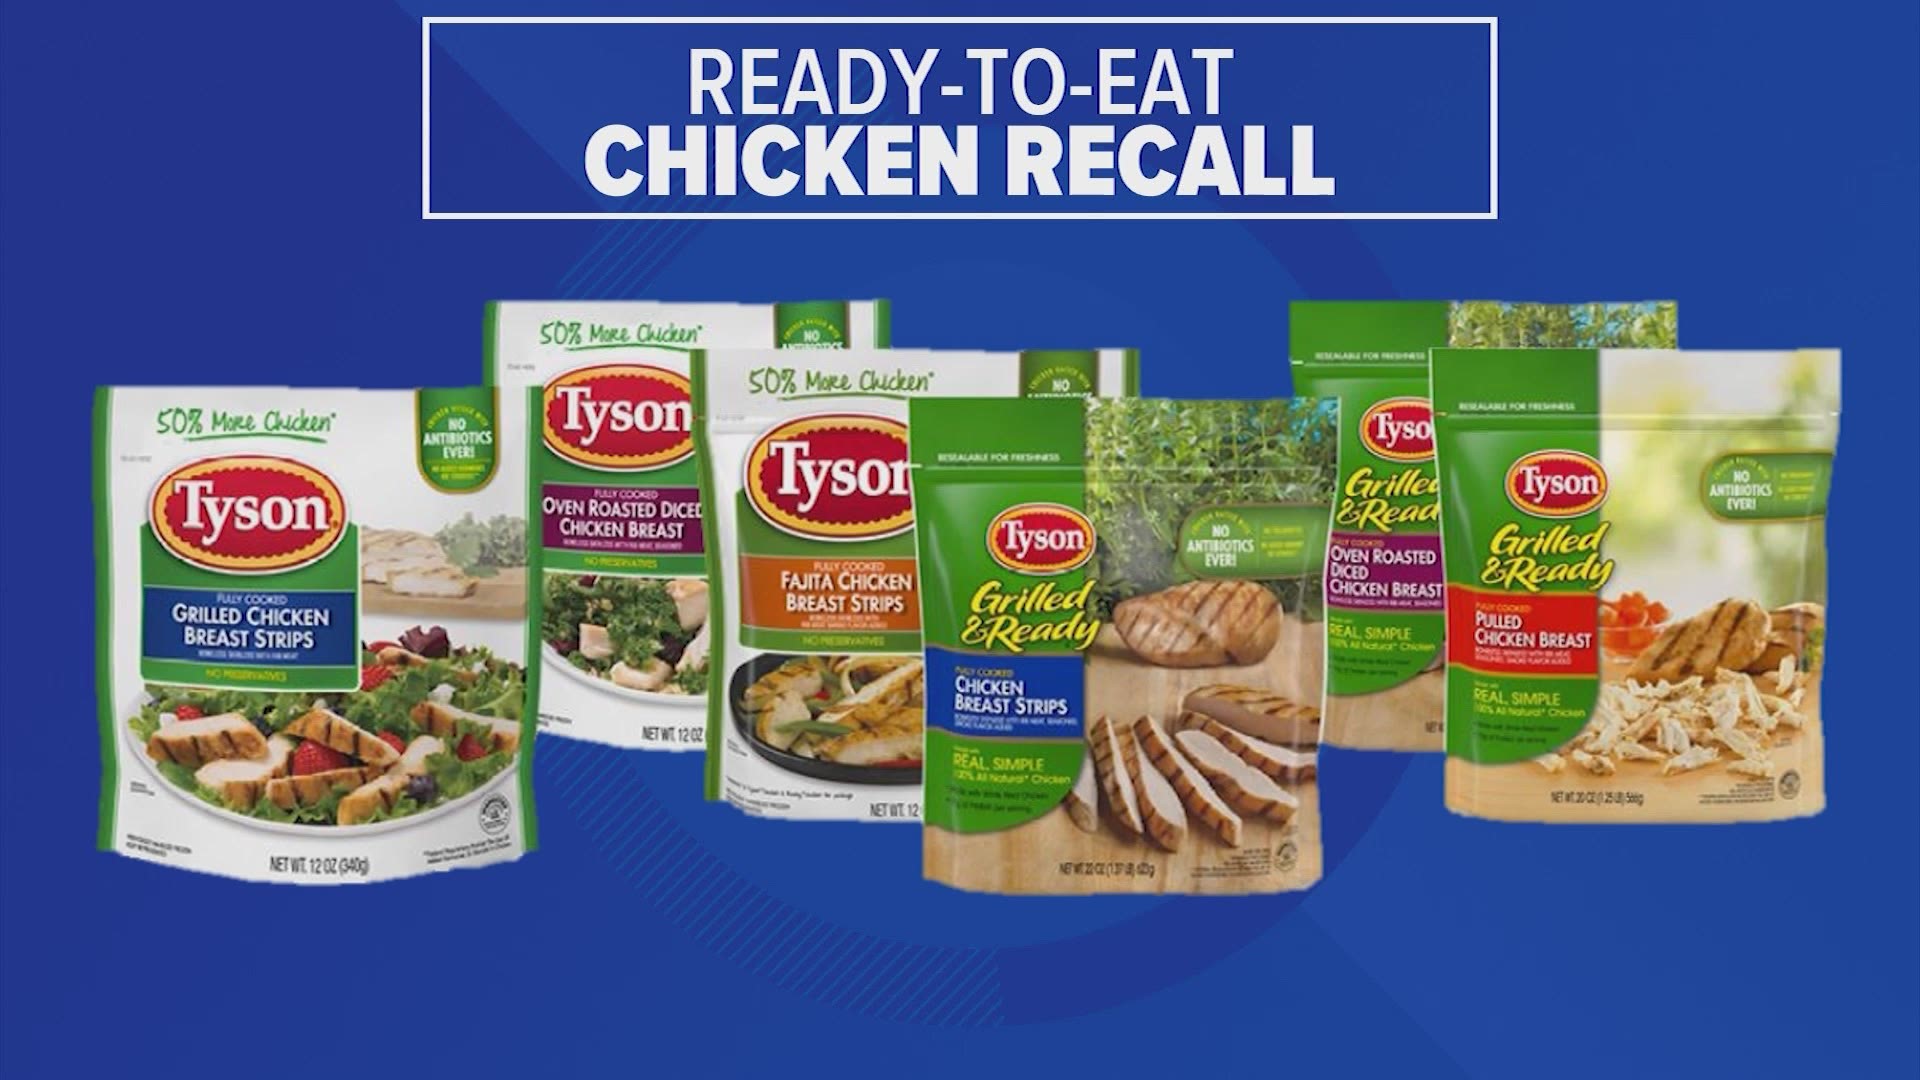 More than 8 million pounds of chicken was recalled due to listeria concerns. Some of the affected chicken was sold at H-E-Bs.